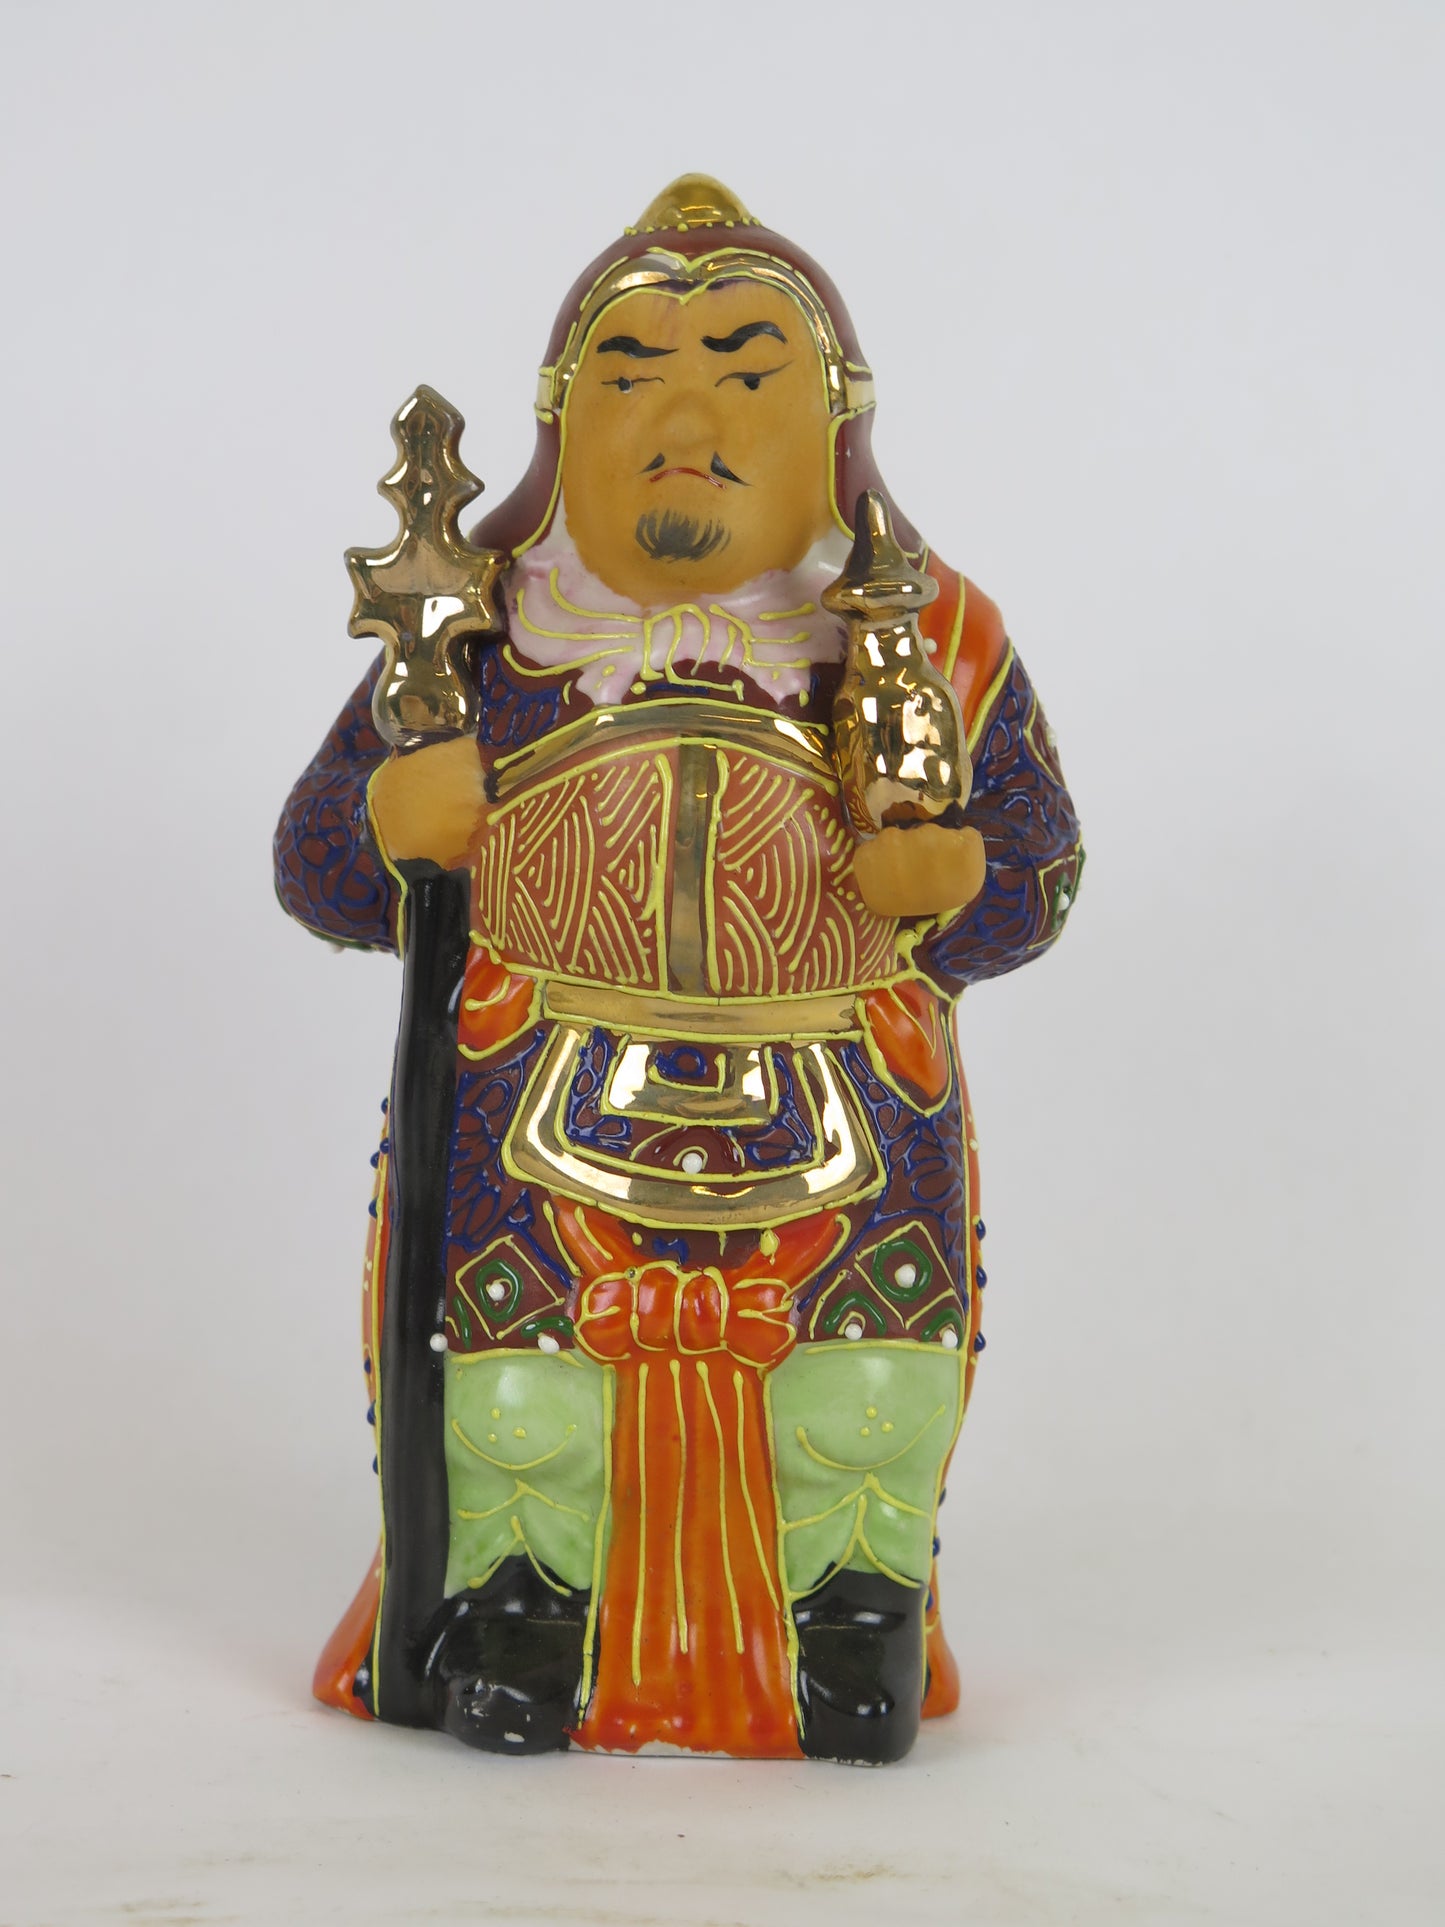 Collection of 9 Japanese Kutani porcelain figurines with various vintage Japan characters CM2